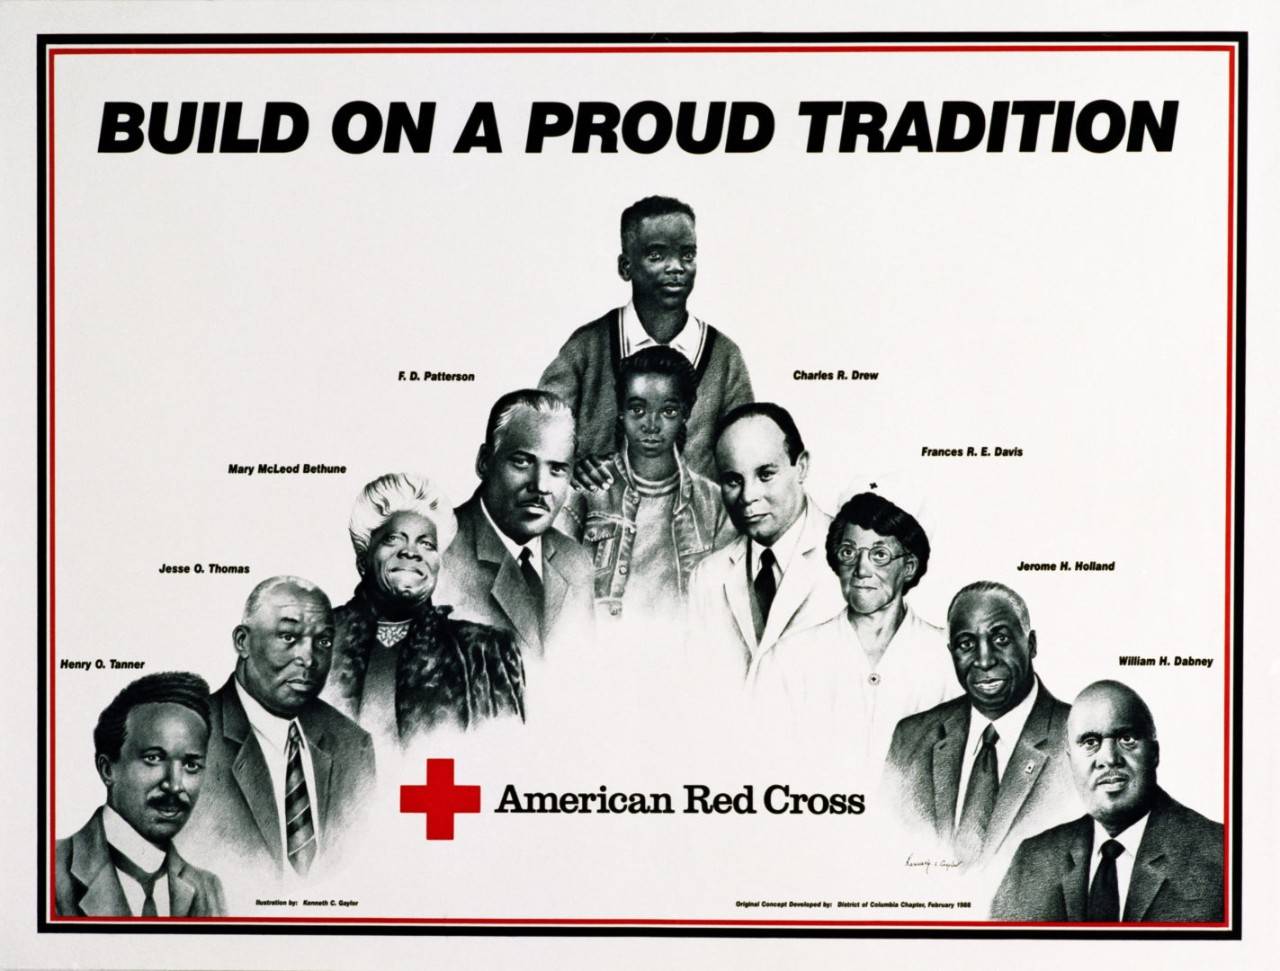 American Red Cross historical poster with the message: Build on a Proud Tradition - F.D. Patterson, Mary McLeod Bethune, Jesse O. Thomas, Henry O. Tanner,  Charles R. Drew, Frances R.E. Davis, Jerome H. Holland, William H. Dabney.  Original concept developed by: District of Columbia Chapter, February 1988.